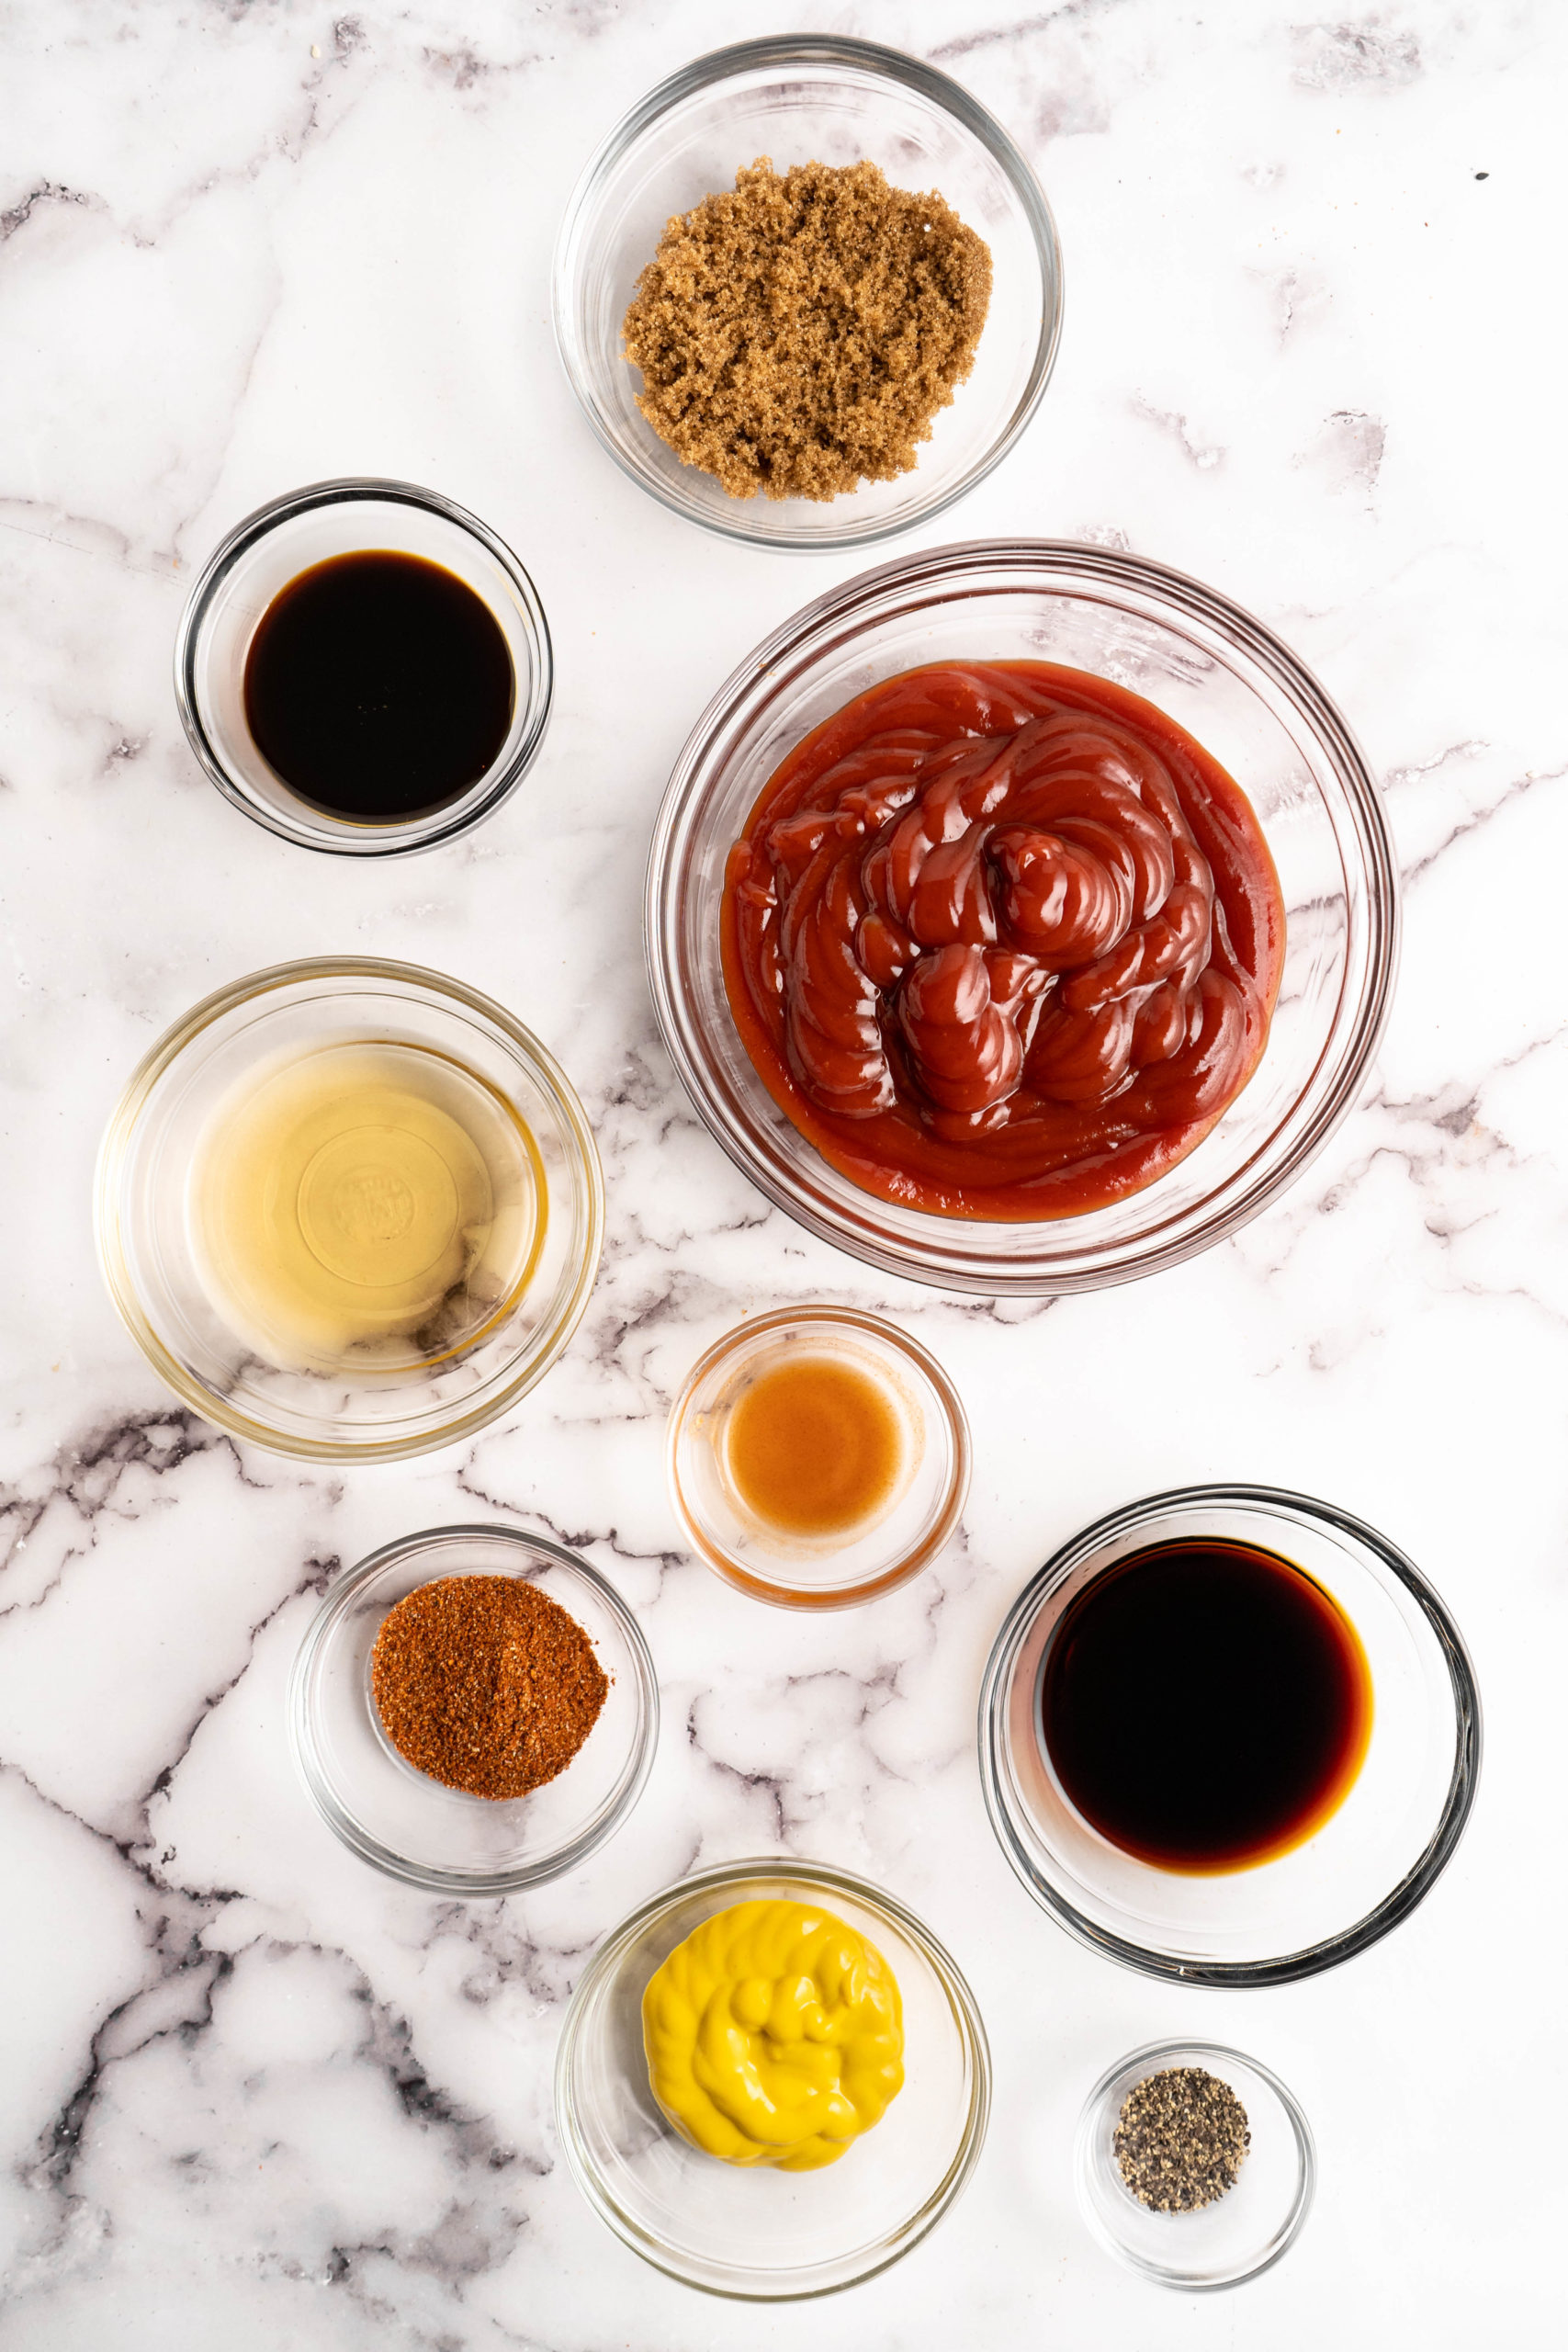 Overhead view of barbecue sauce ingredients